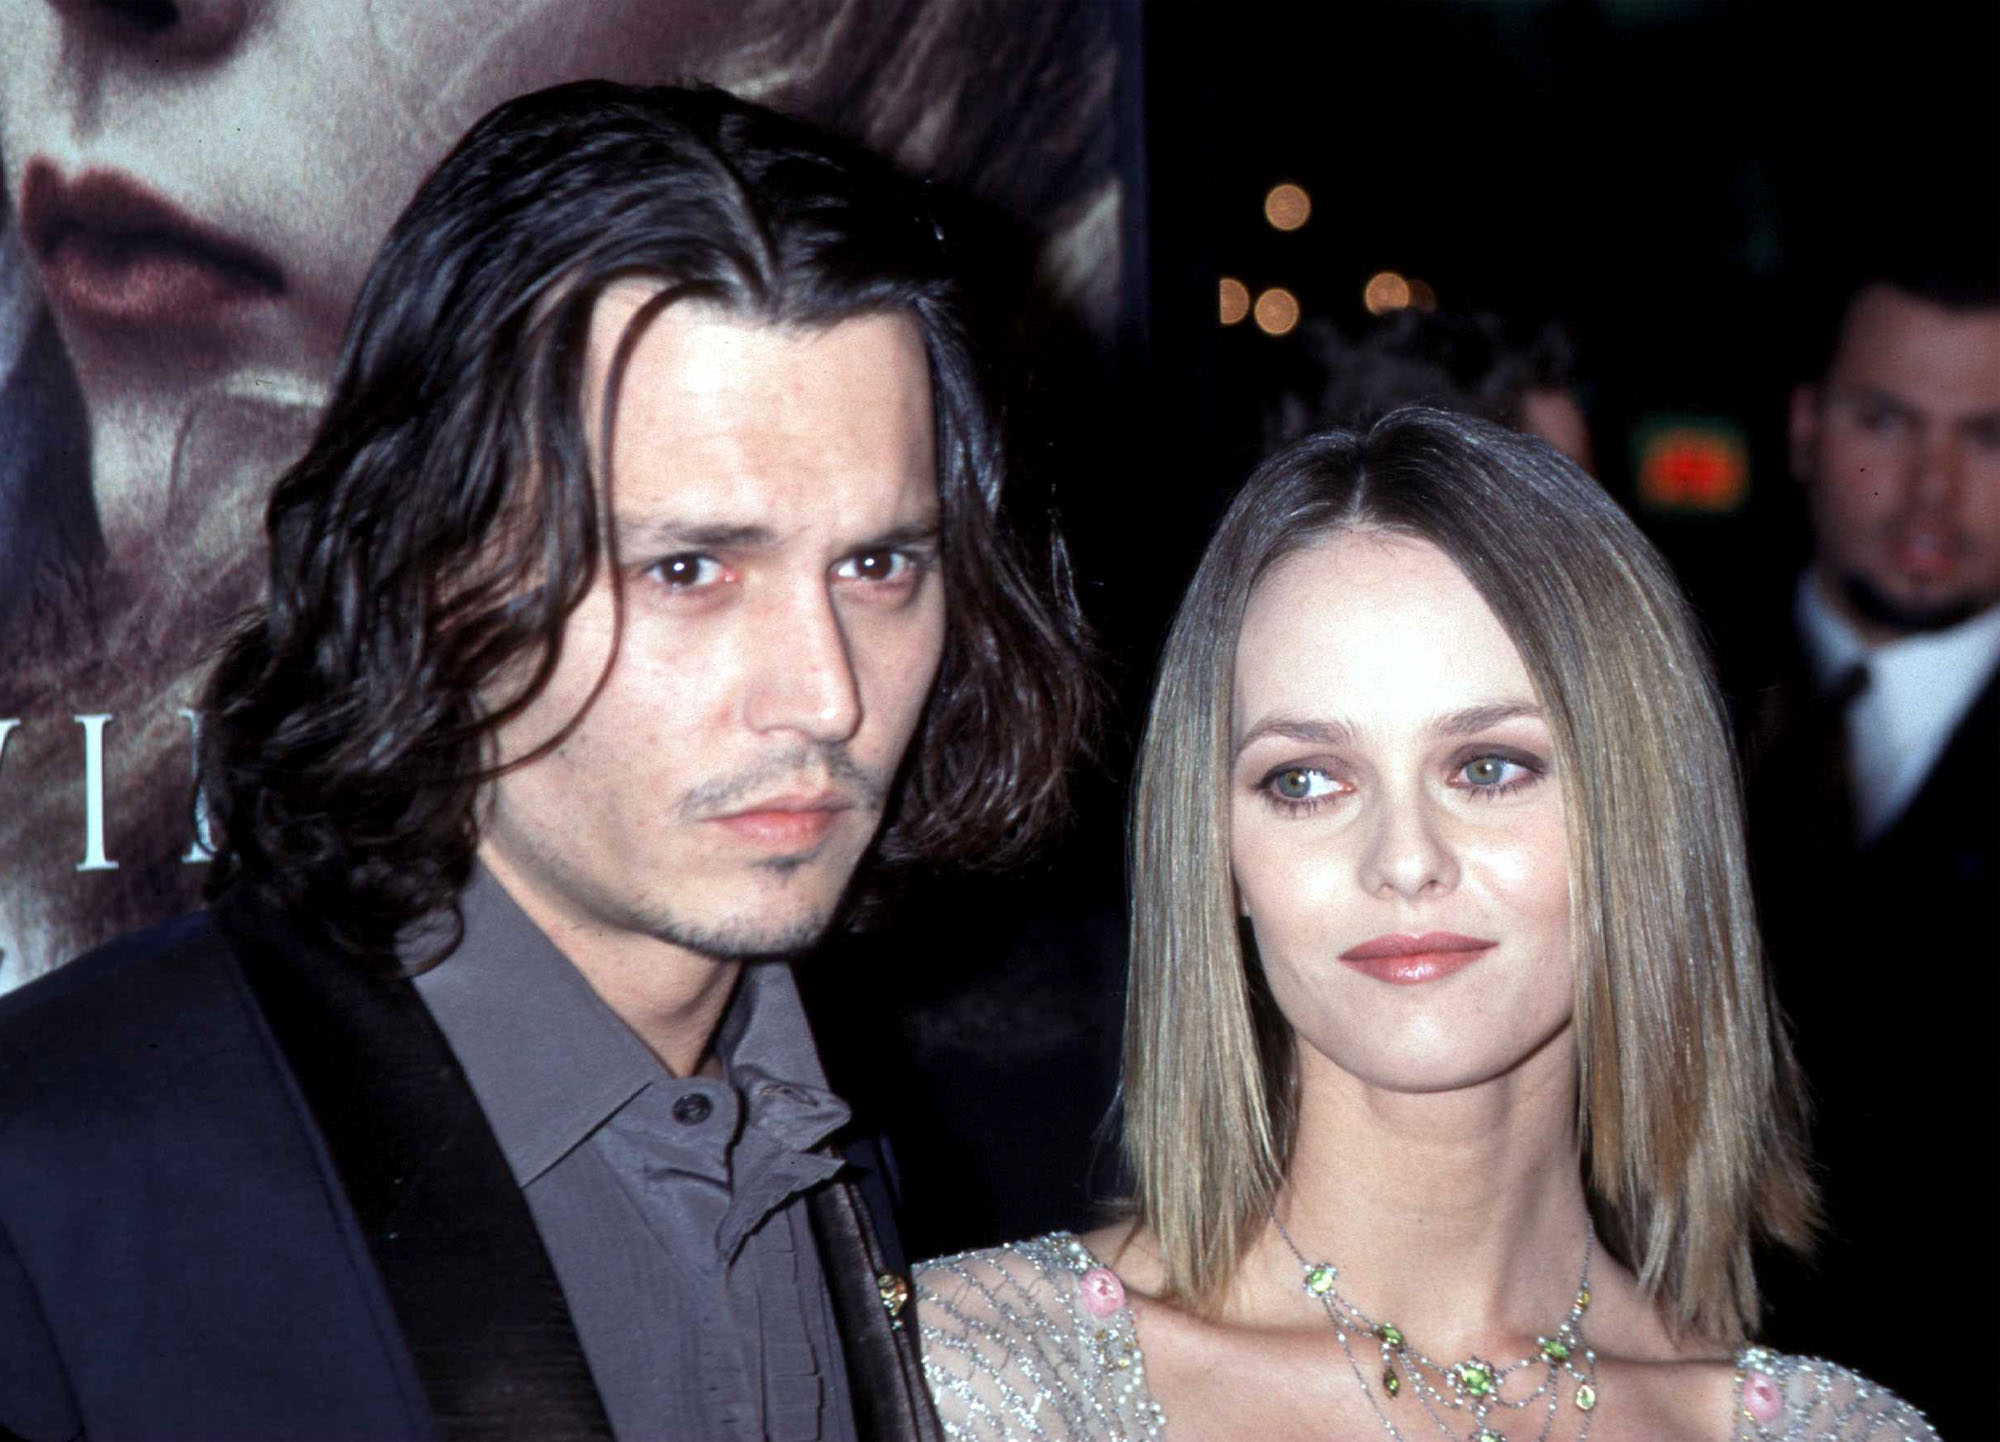 Johnny Depp and Vanessa Paradis at the premiere of "Sleepy Hollow" in Los Angeles, California on November 17, 1999 | Source: Getty Images